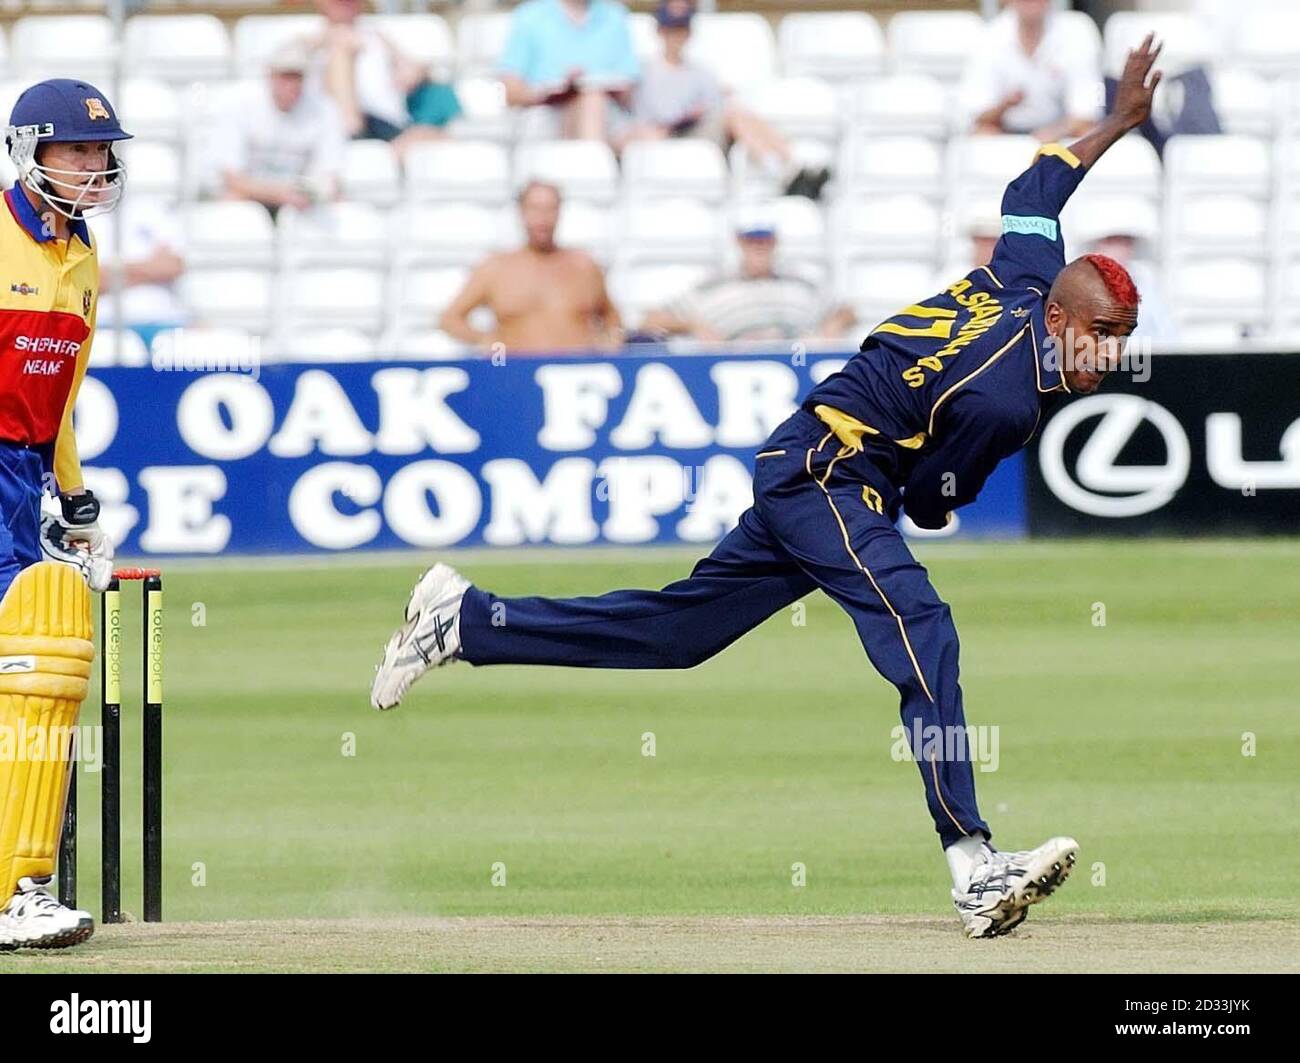 Hampshire Hawks bowler Dimitri Mascarenhas in action with a Mohican hair cut, during their tote Sport League Division One match against Essex Eagles at Chelmsford, Essex. Stock Photo